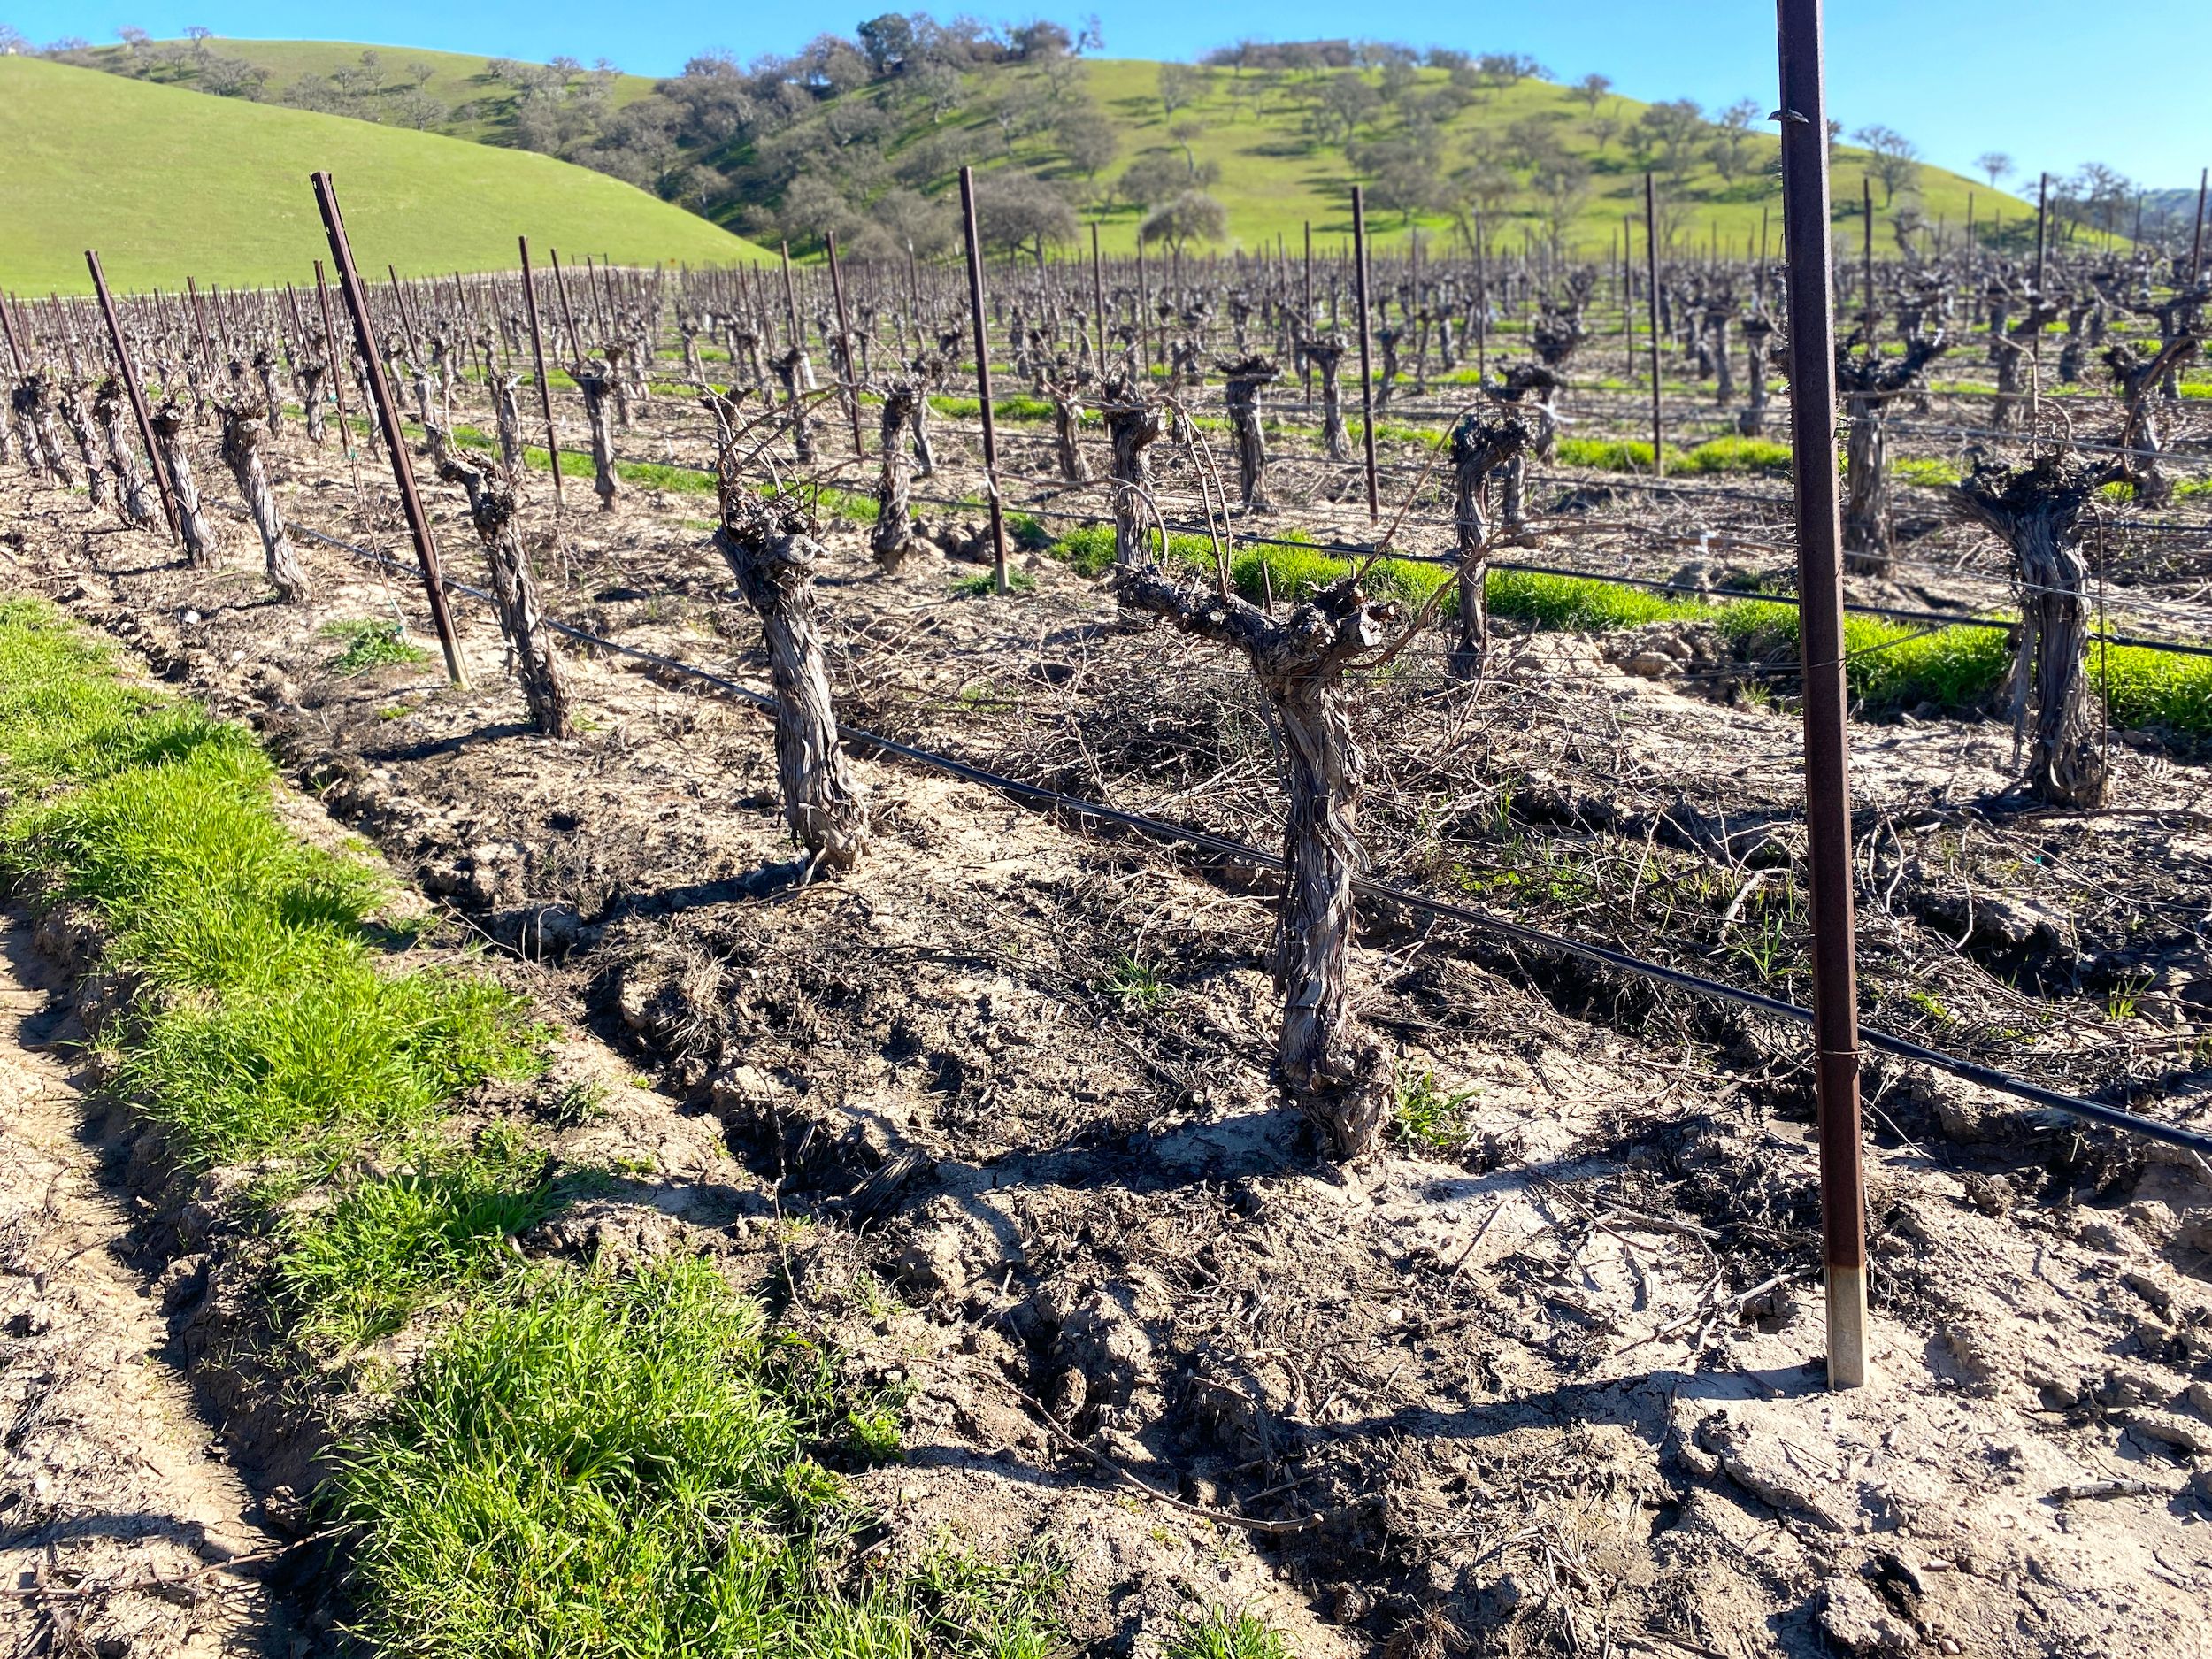 Winter pruned vines at Cass Winery in Paso Robles, California